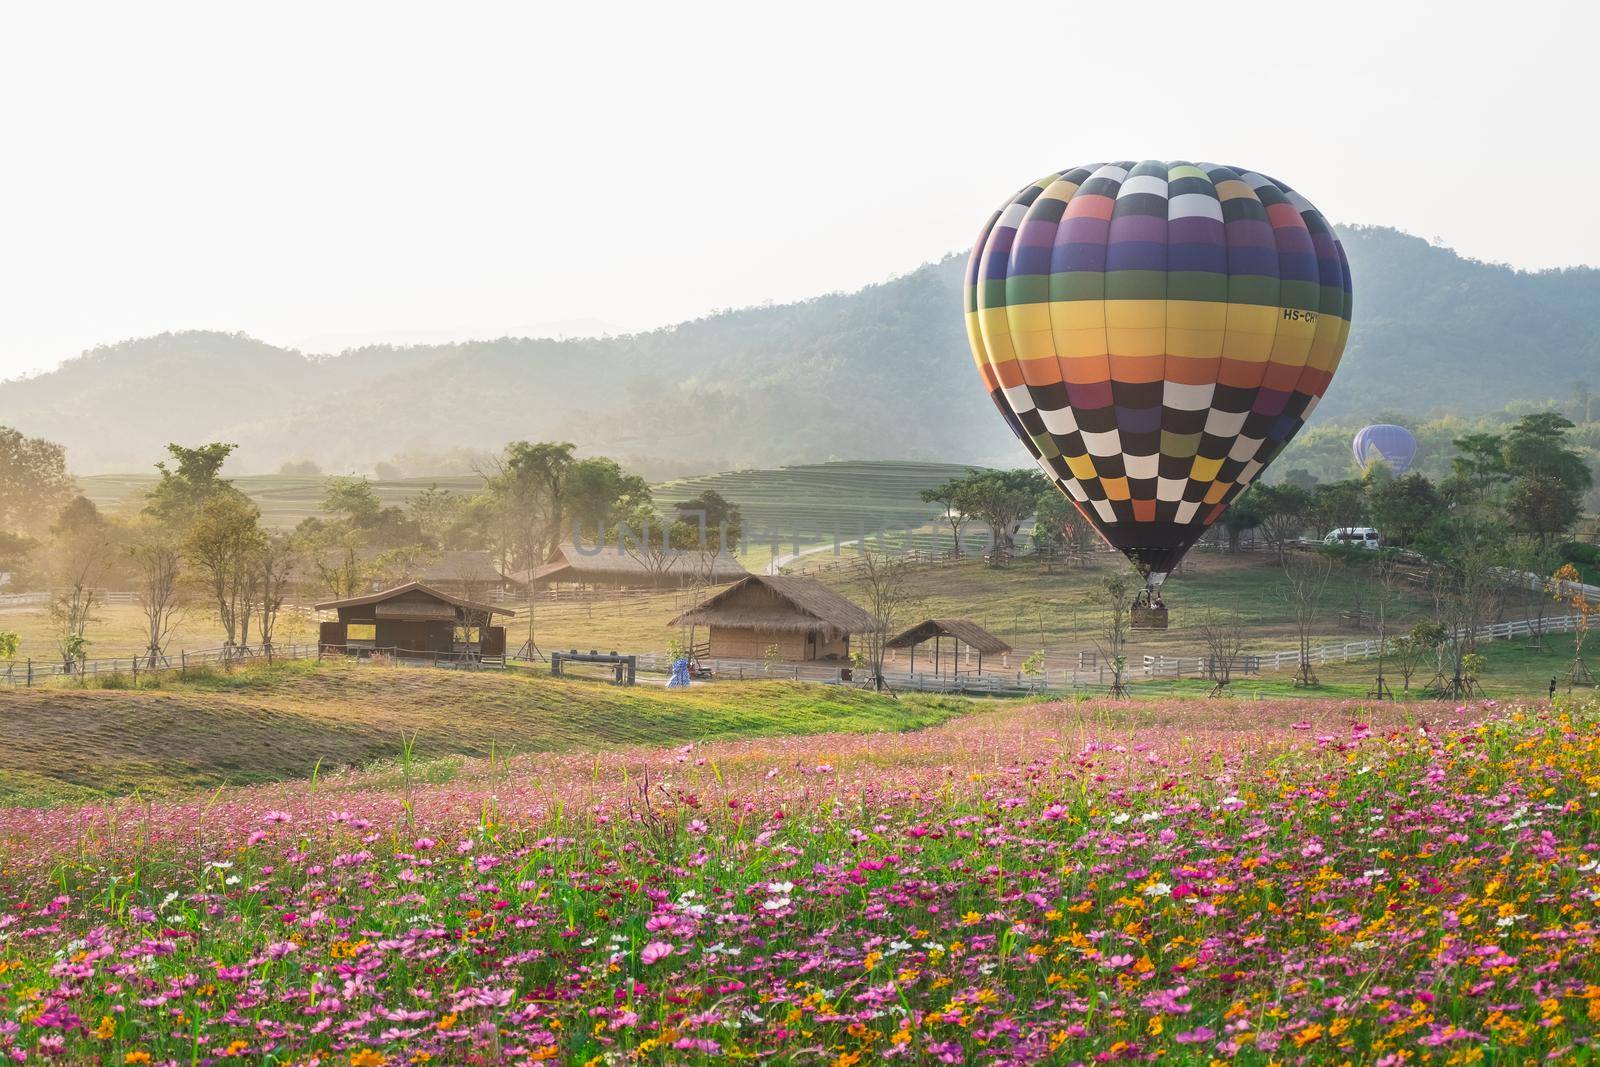 The hot air balloons flying over the cosmos flowers field in Singha park international balloons fiesta 2017 in Chiang Rai province of Thailand.